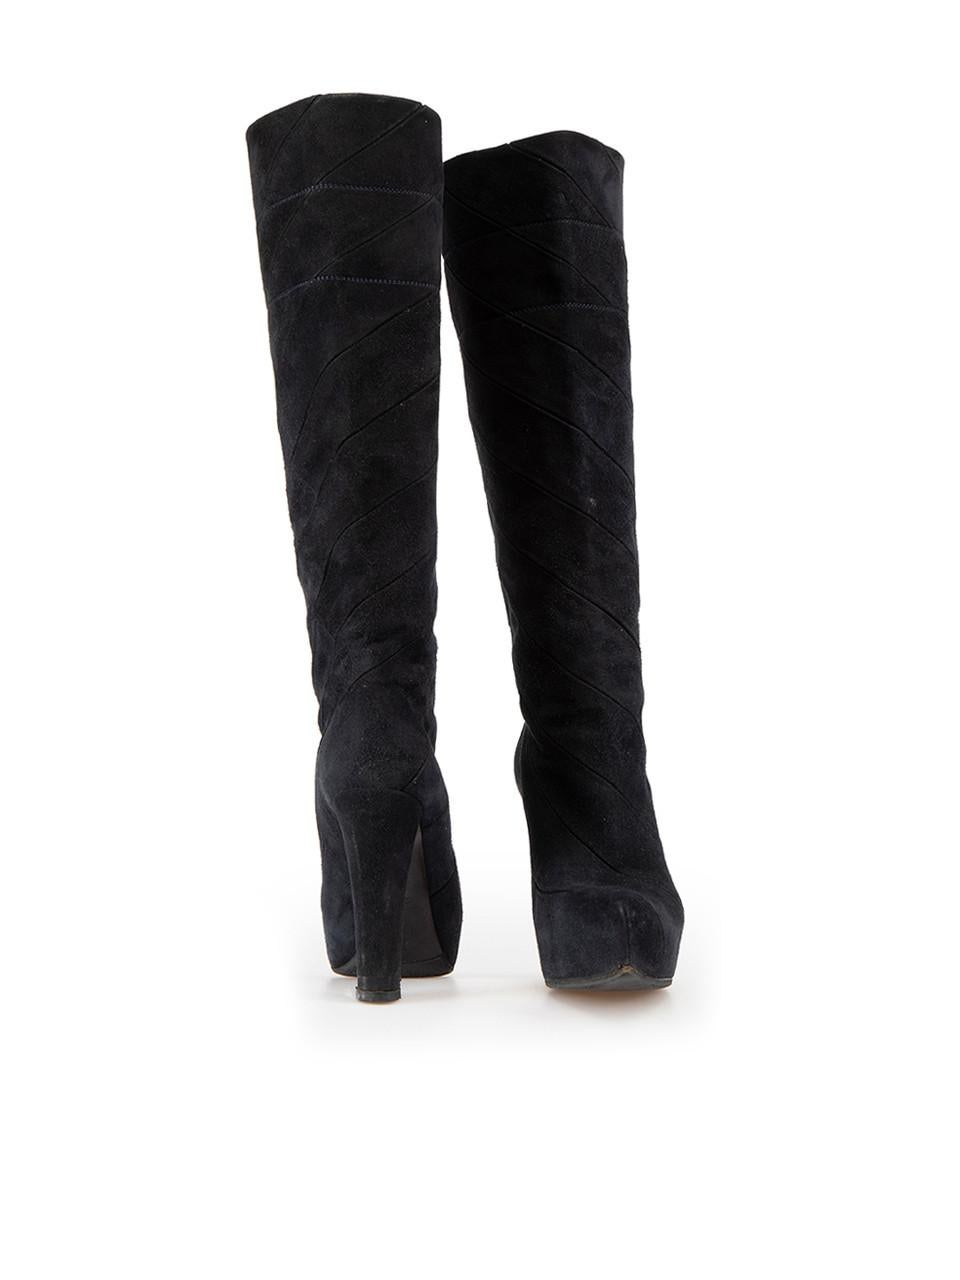 Louis Vuitton Navy Suede Spiral Knee High Boots Size IT 37 In Good Condition For Sale In London, GB